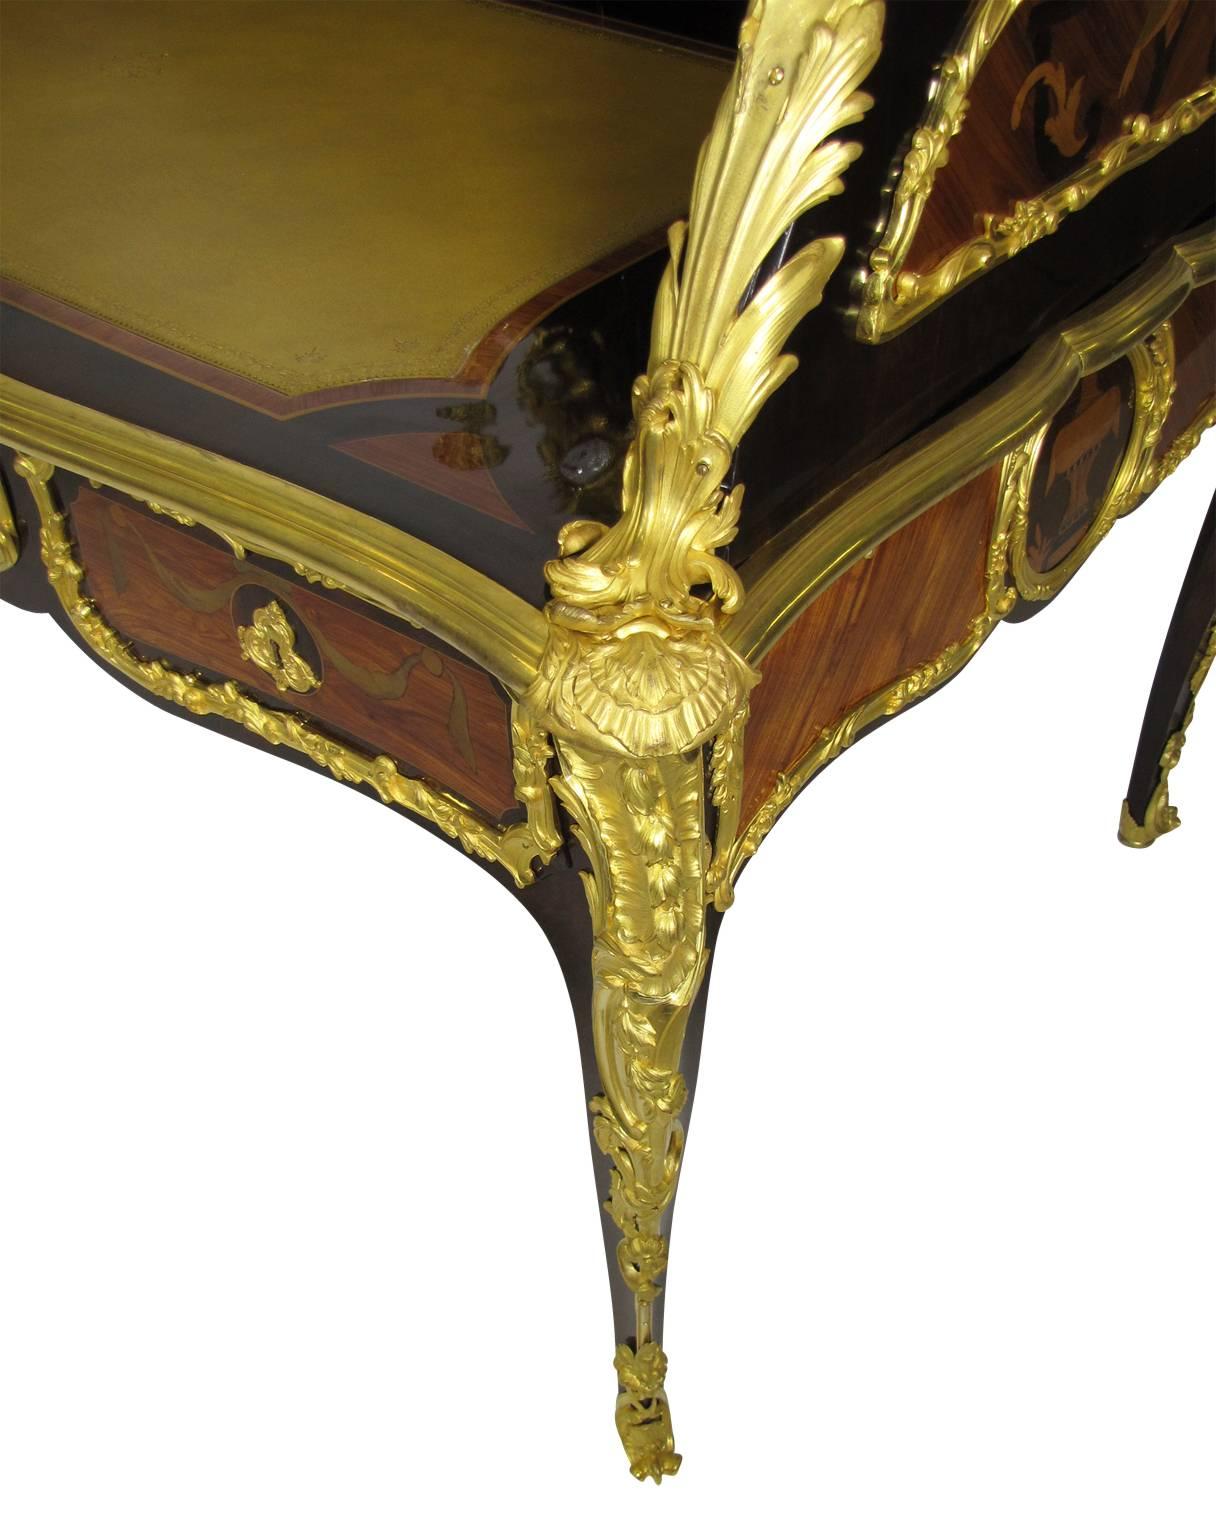 Palatial French 19th-Century Louis XV style figural gilt bronze mounted tulipwood marquetry three-drawer bureau-plat cartonnier with Dual clock-works by Lenoir, Paris, surmounted with a pair two-light gilt bronze mounted candelabra. All two-tone